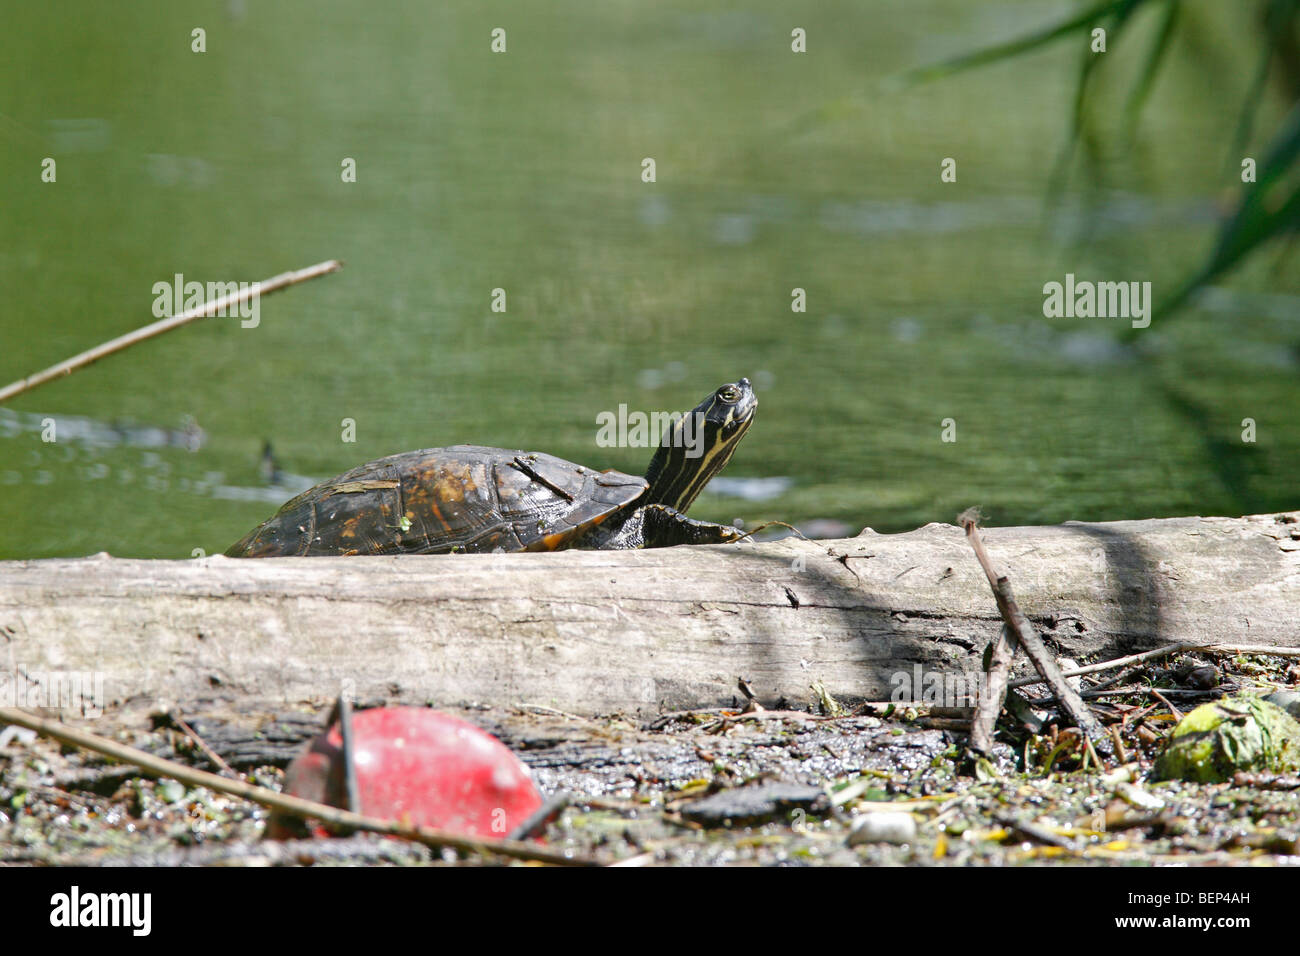 A released Terrapin crawling out on to log to sunbathe Stock Photo